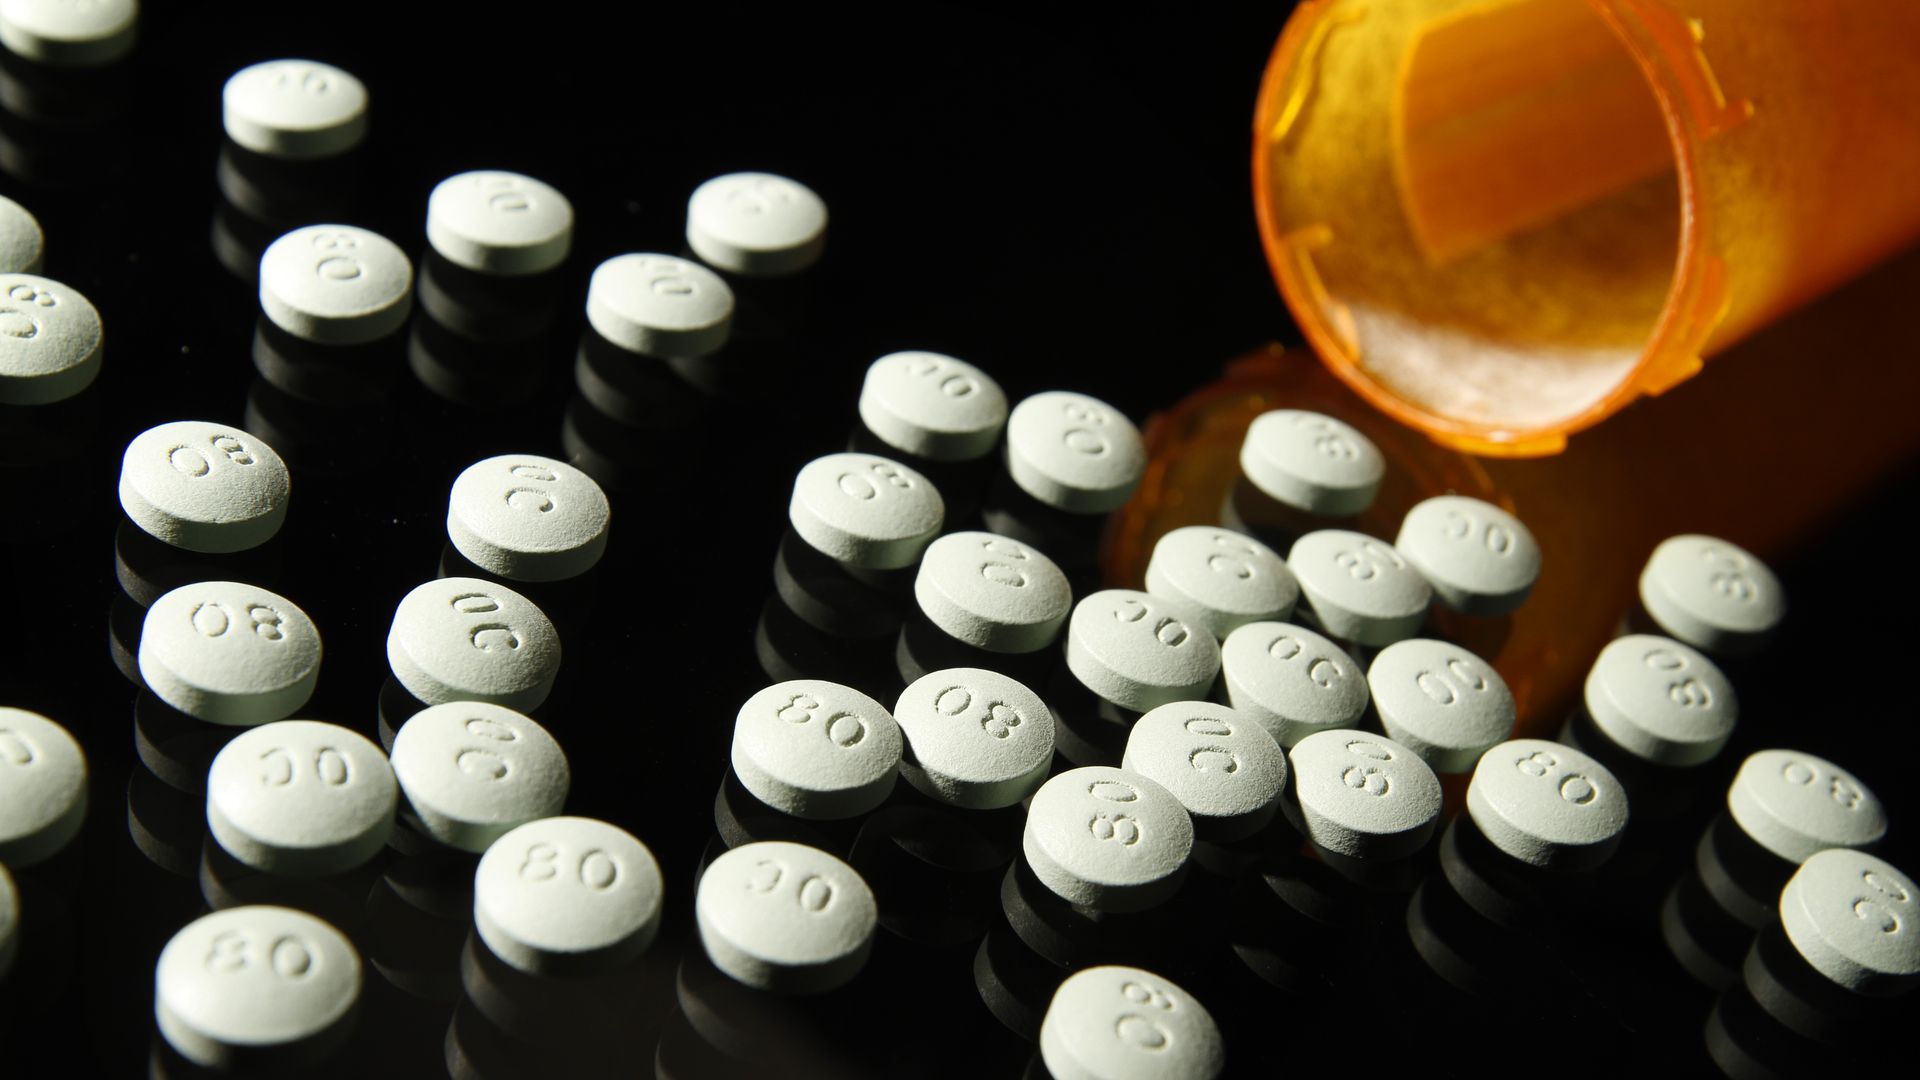 OxyContin pills lay on a table with a bottle on its side.